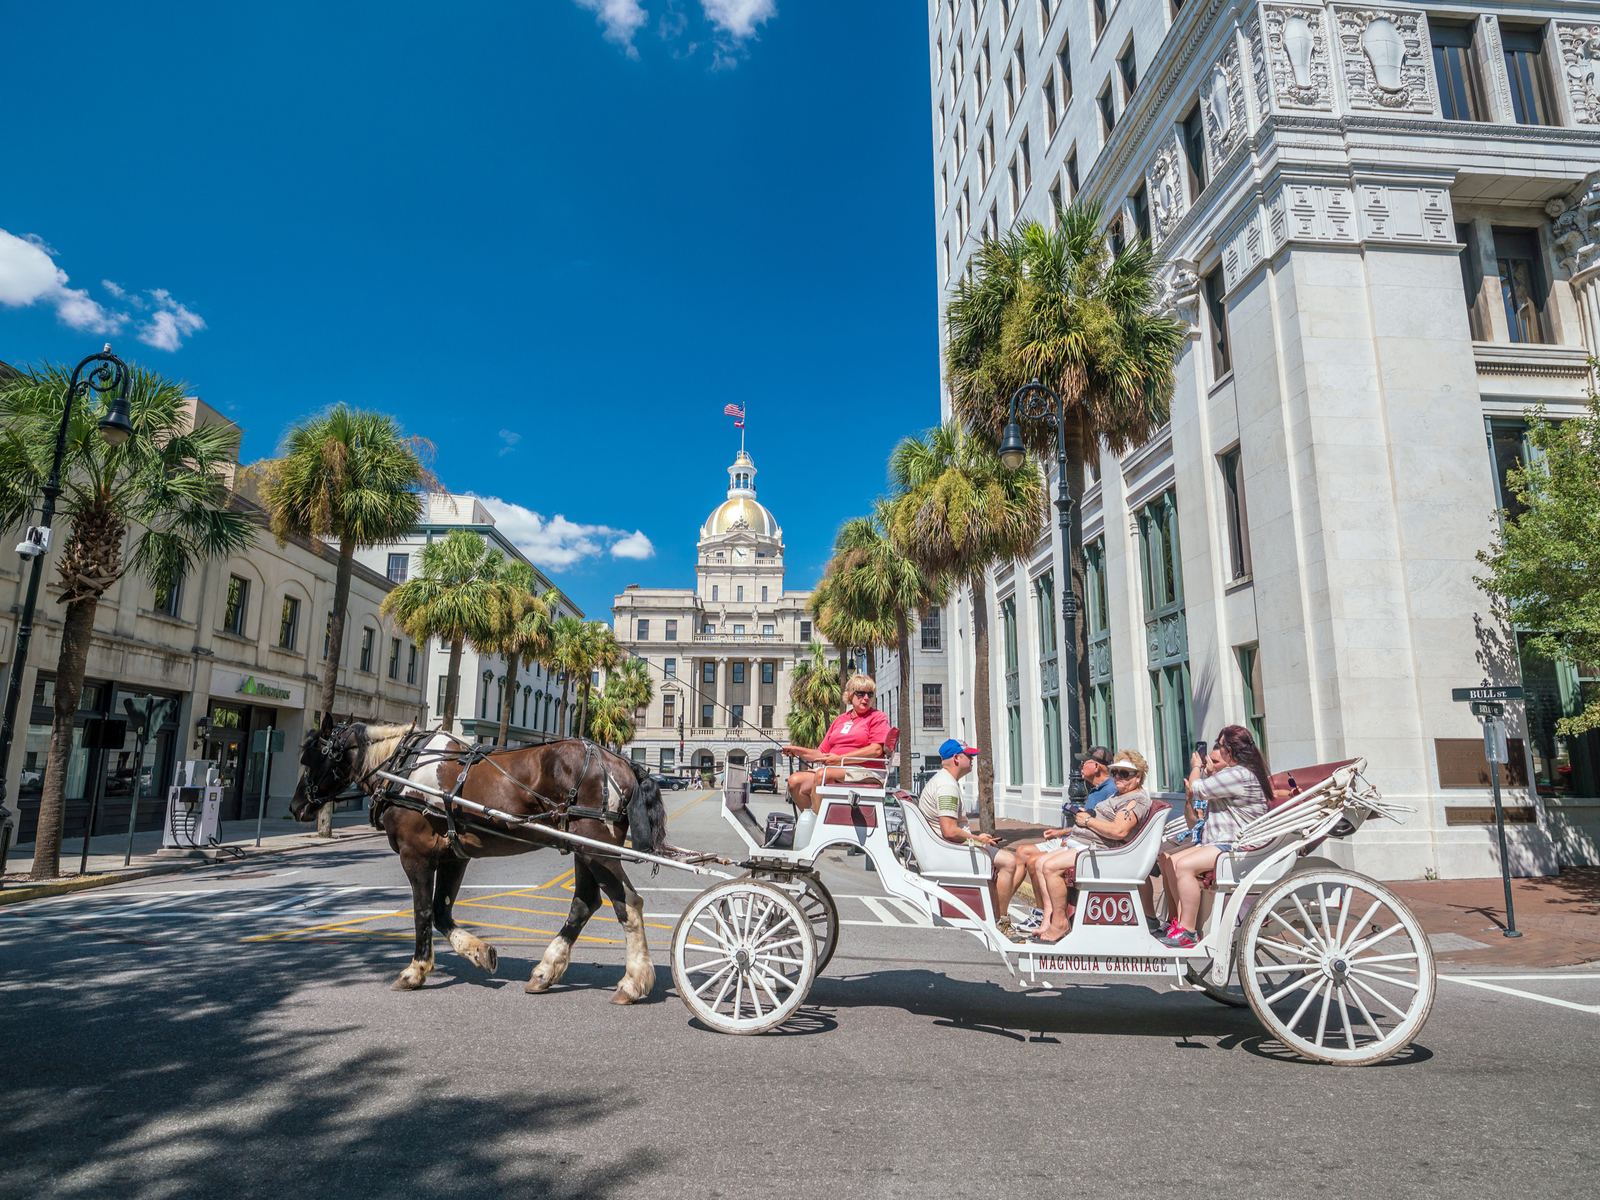 A family of tourists riding a traditional carriage on the street in Savannah, Georgia, considered one of the most beautiful cities in the US